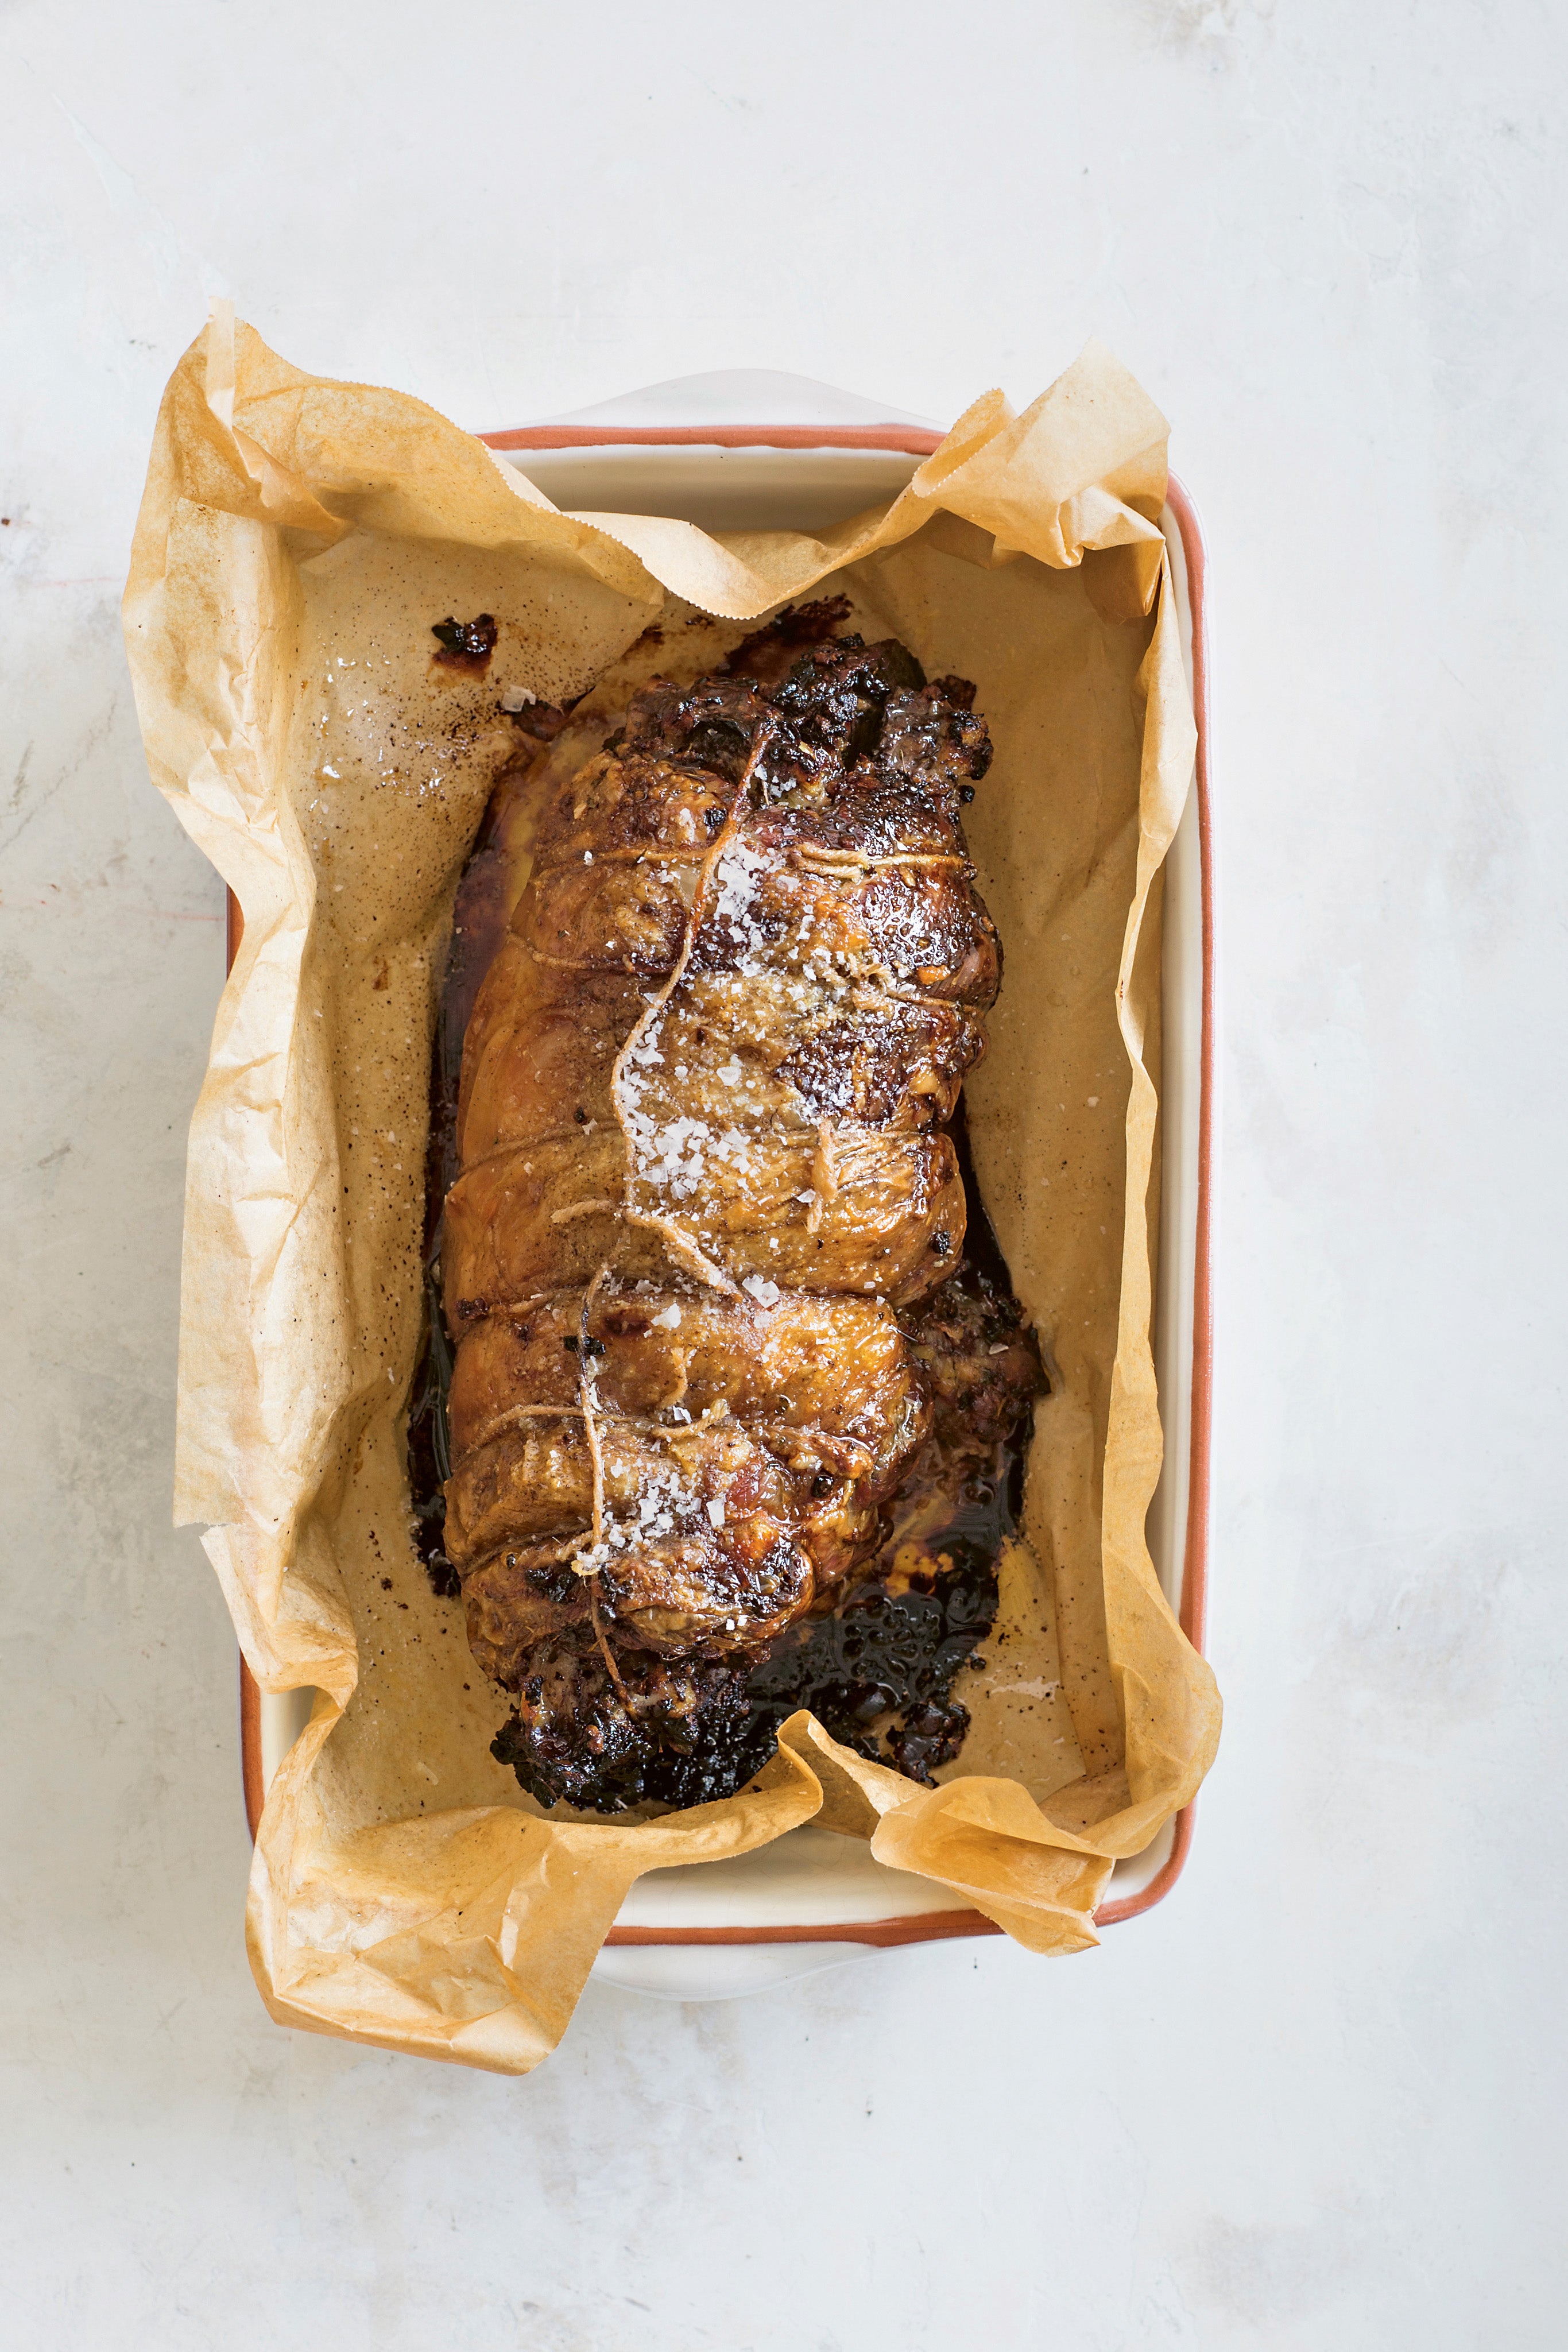 An ideal addition to your ‘Christmas in July’ dinner table (or any Sunday roast, really)